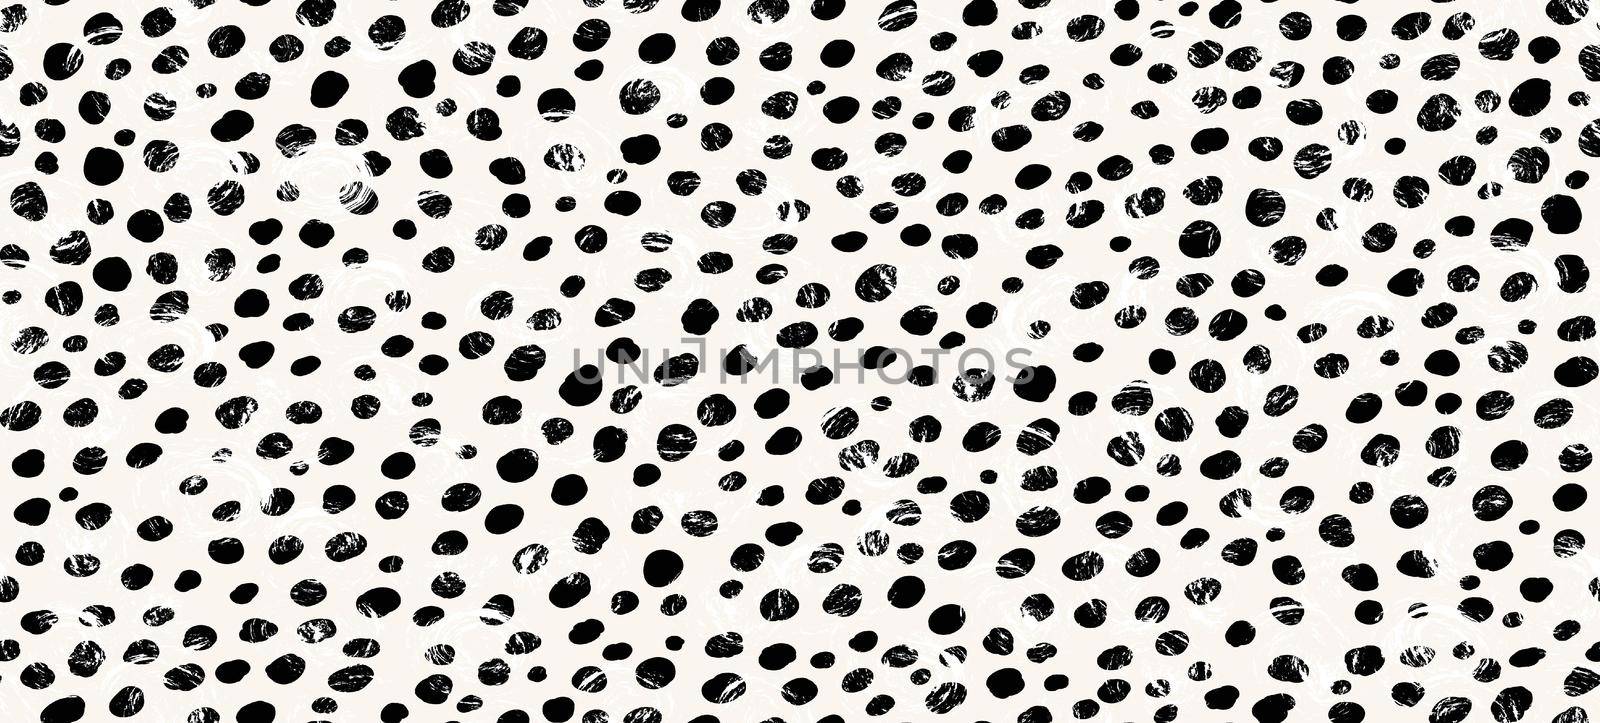 Abstract modern leopard seamless pattern. Animals trendy background. Black and white decorative vector stock illustration for print, card, postcard, fabric, textile. Modern ornament of stylized skin.